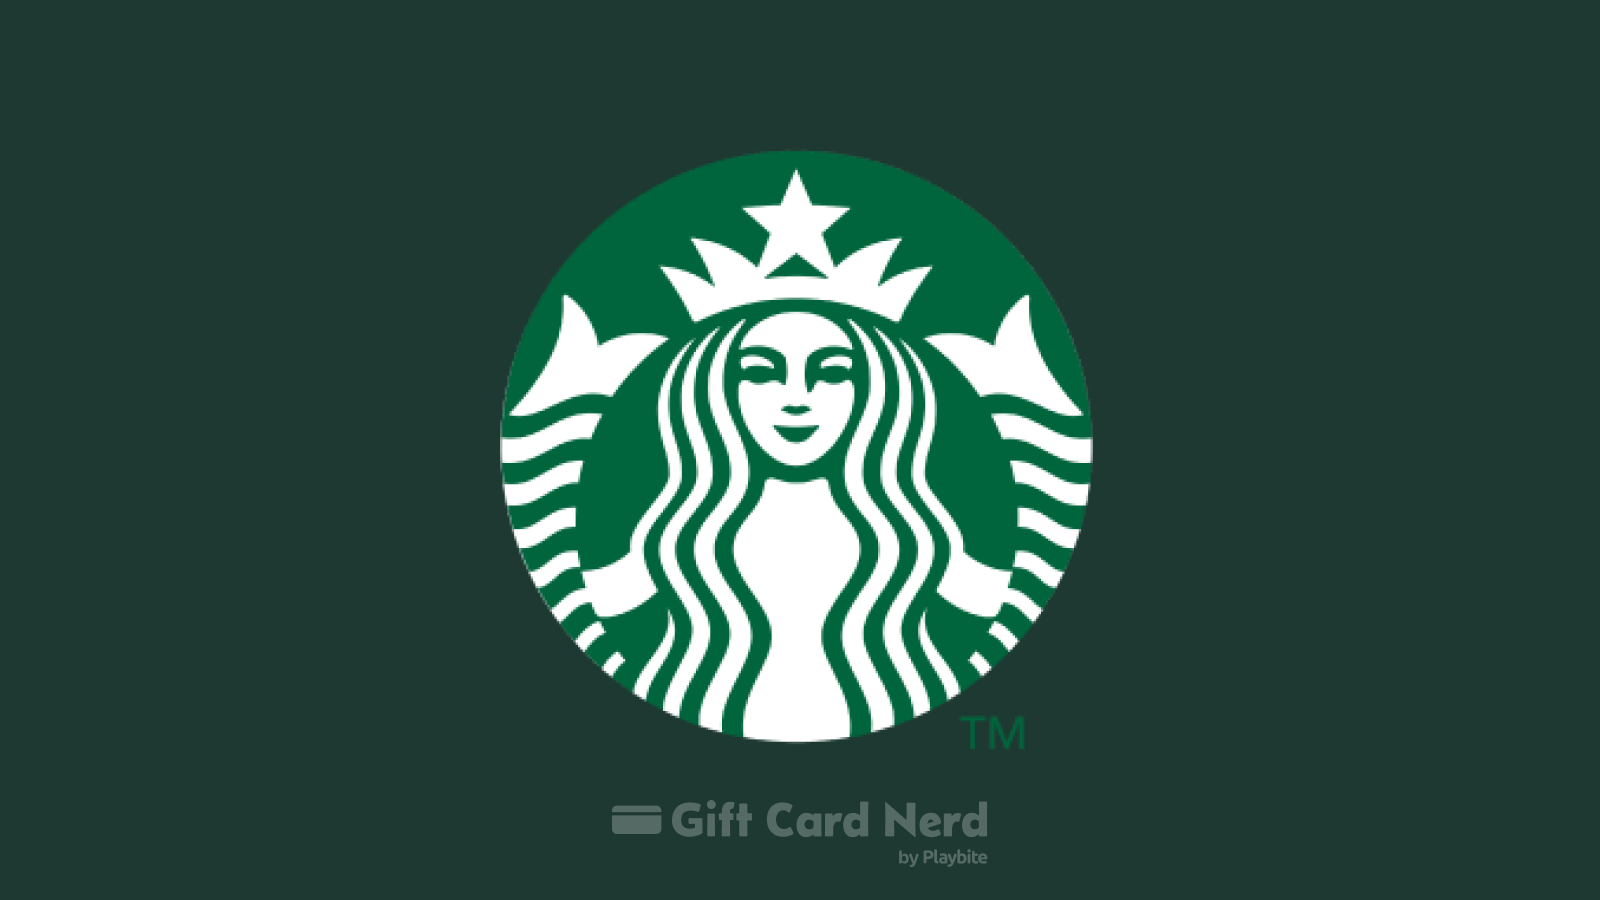 Can I Use a Starbucks Gift Card on Uber Eats?